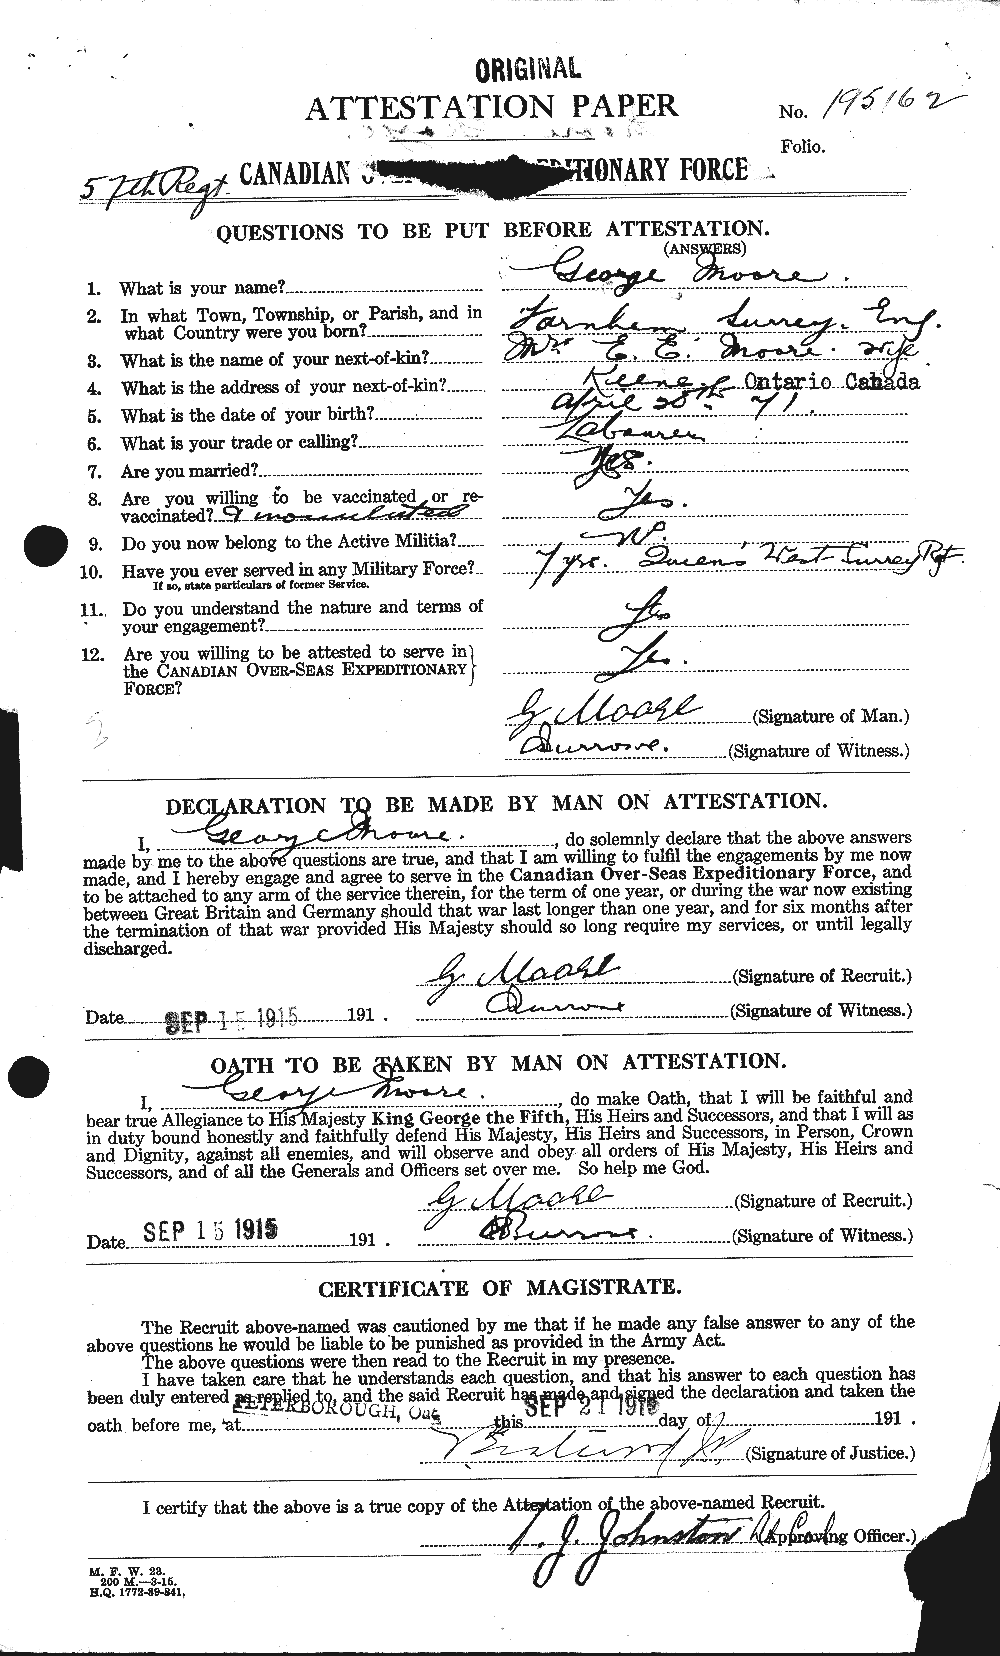 Personnel Records of the First World War - CEF 509415a